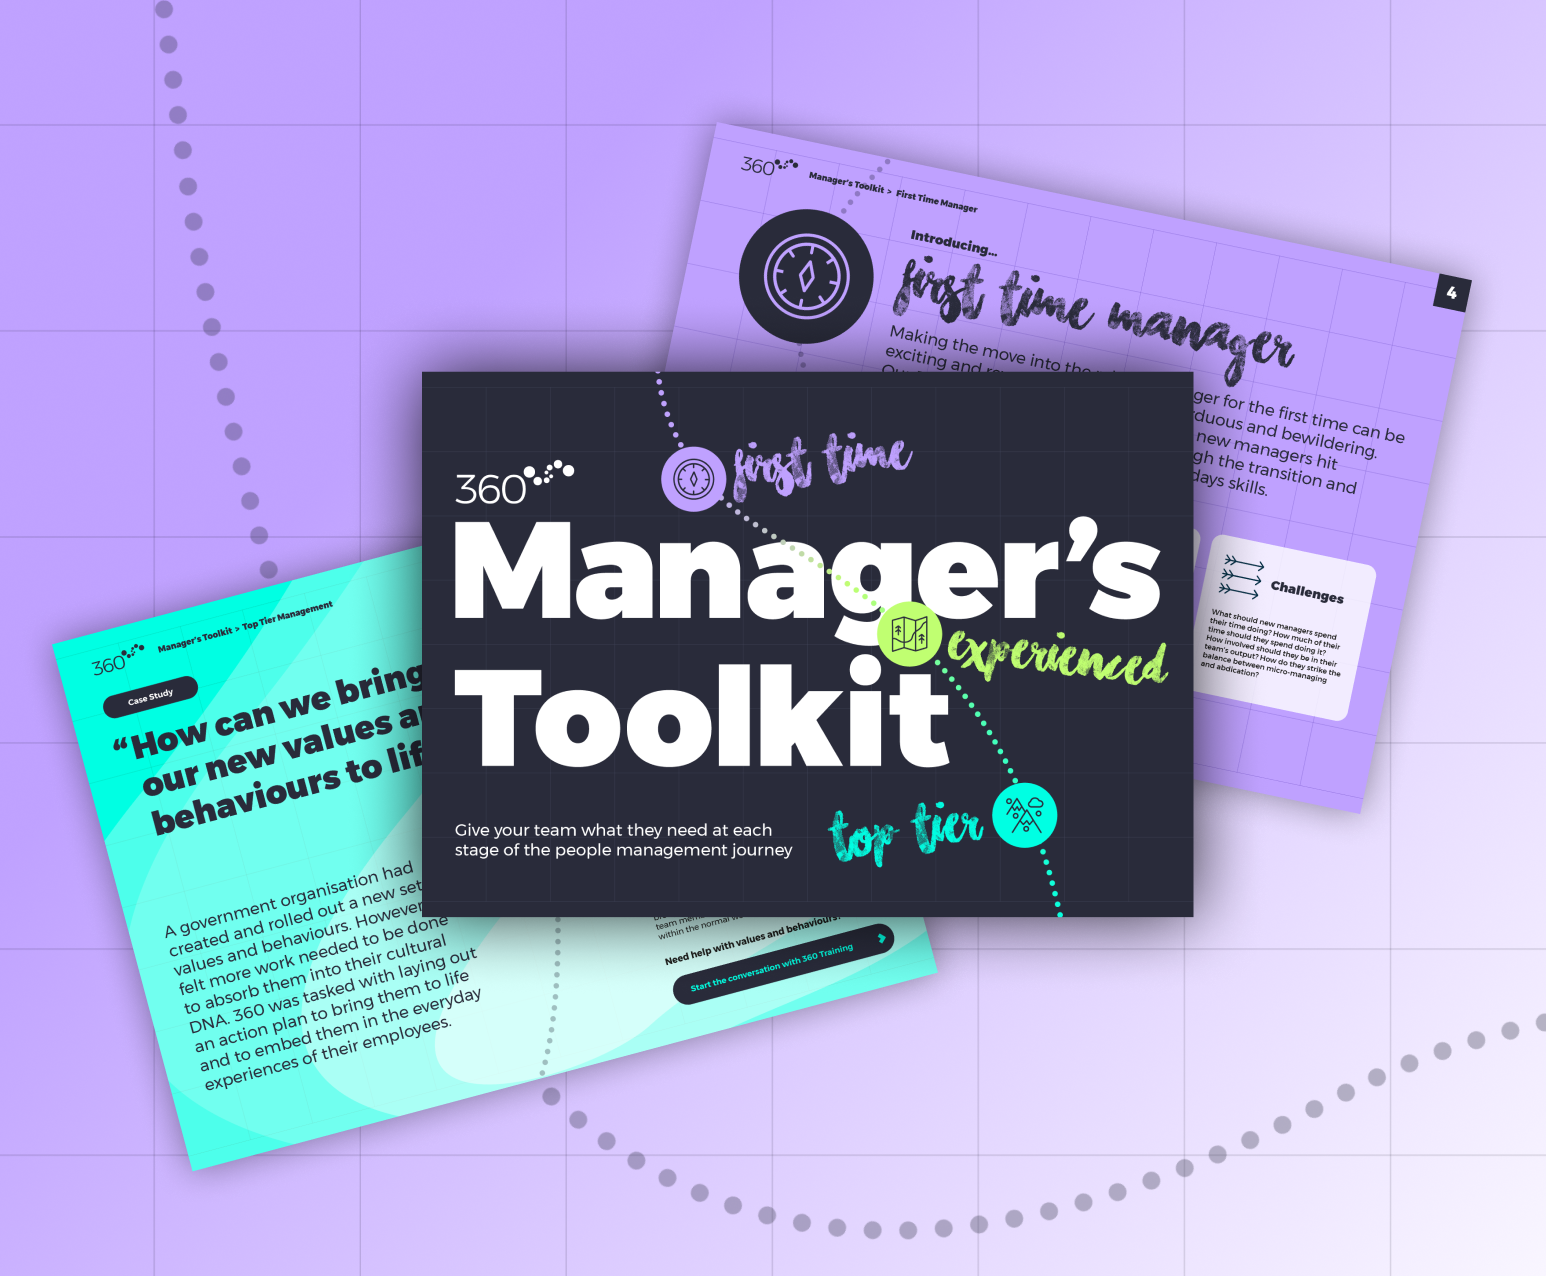 Download the Manager's Toolkit